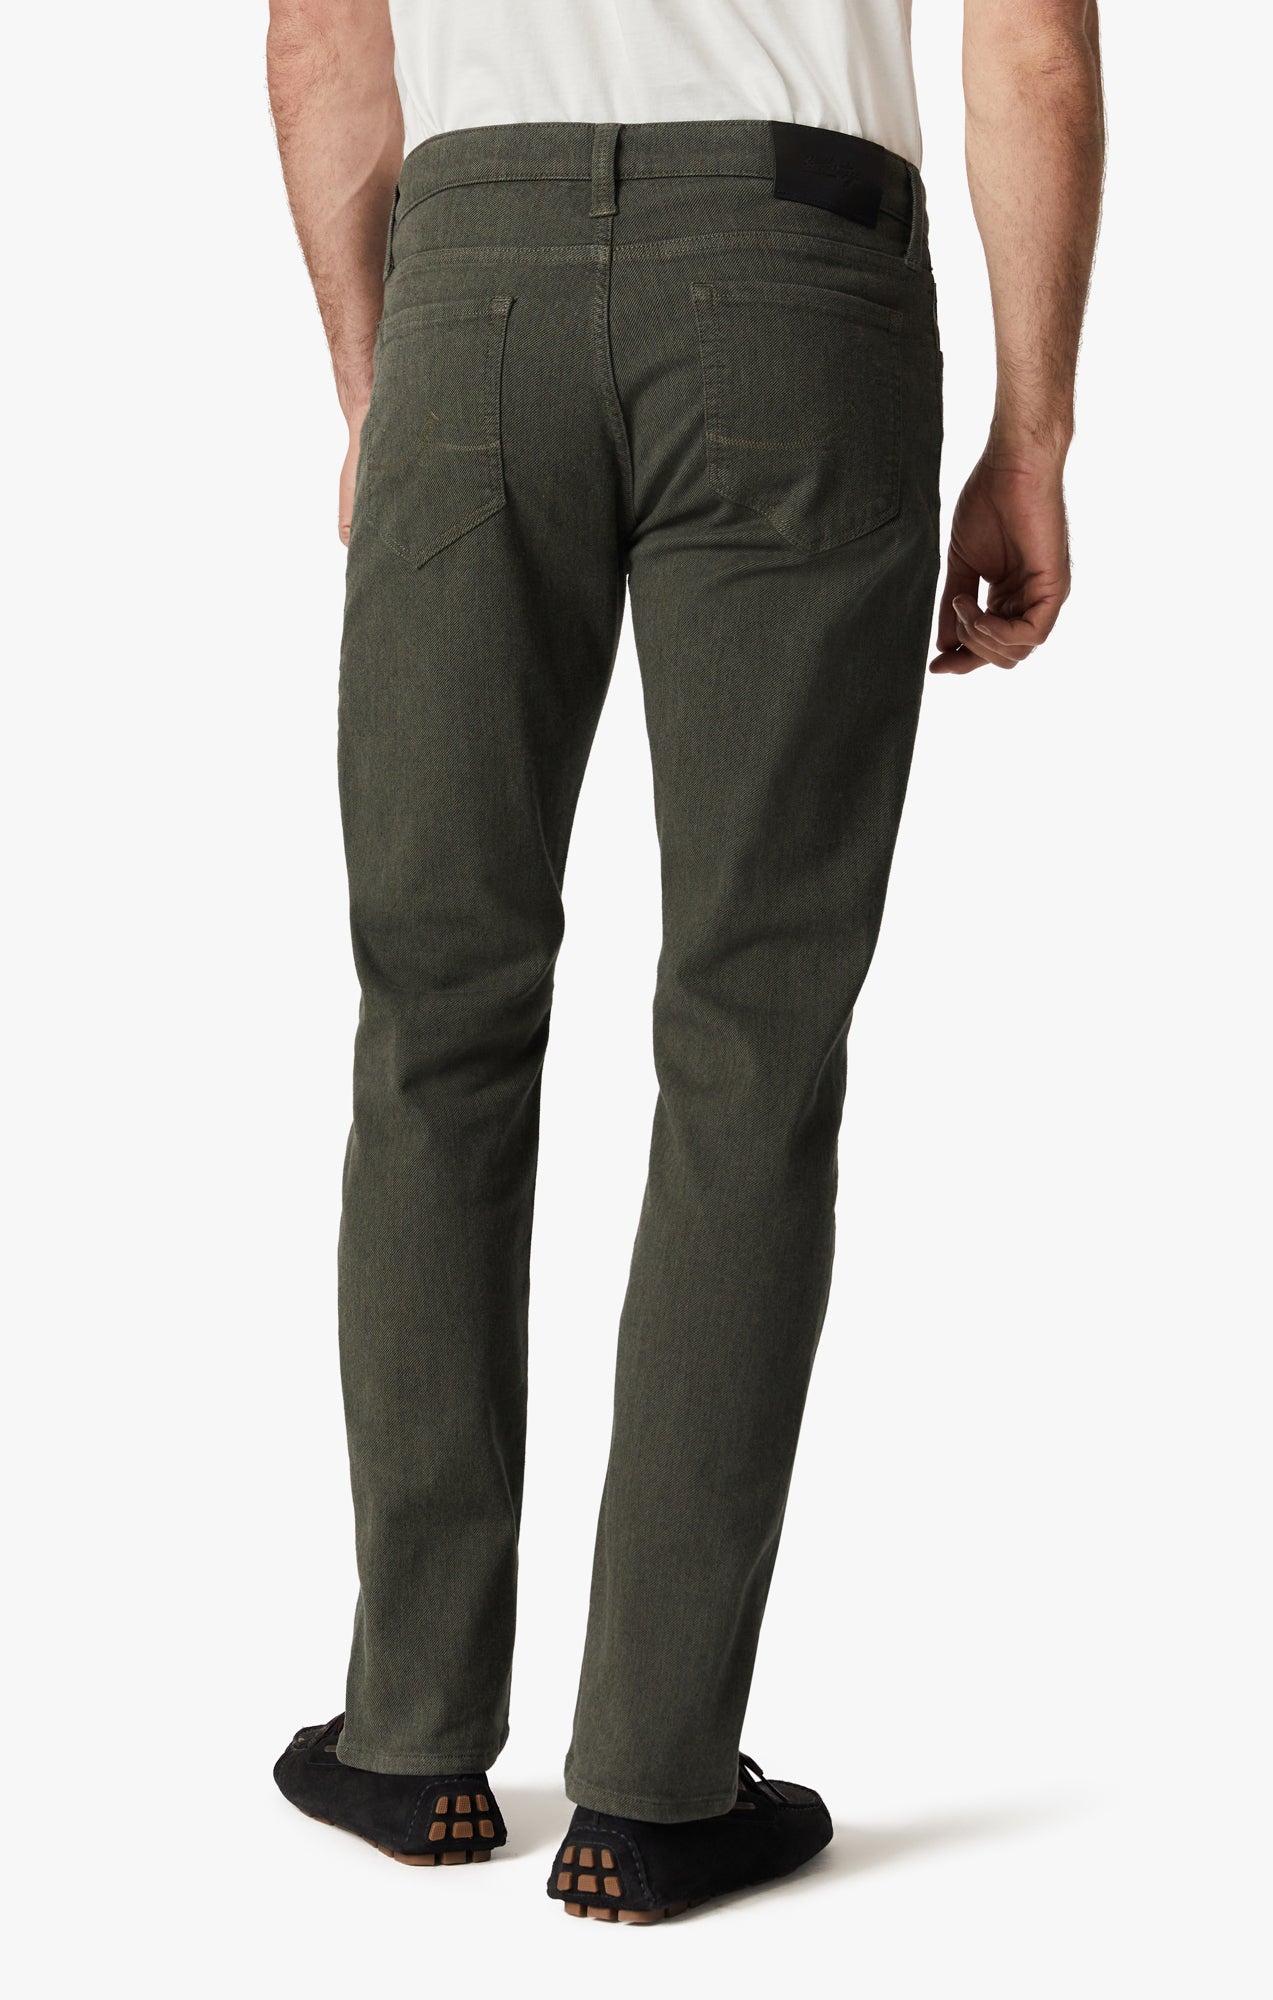 Courage Straight Leg Pants in Forest Diagonal Image 5